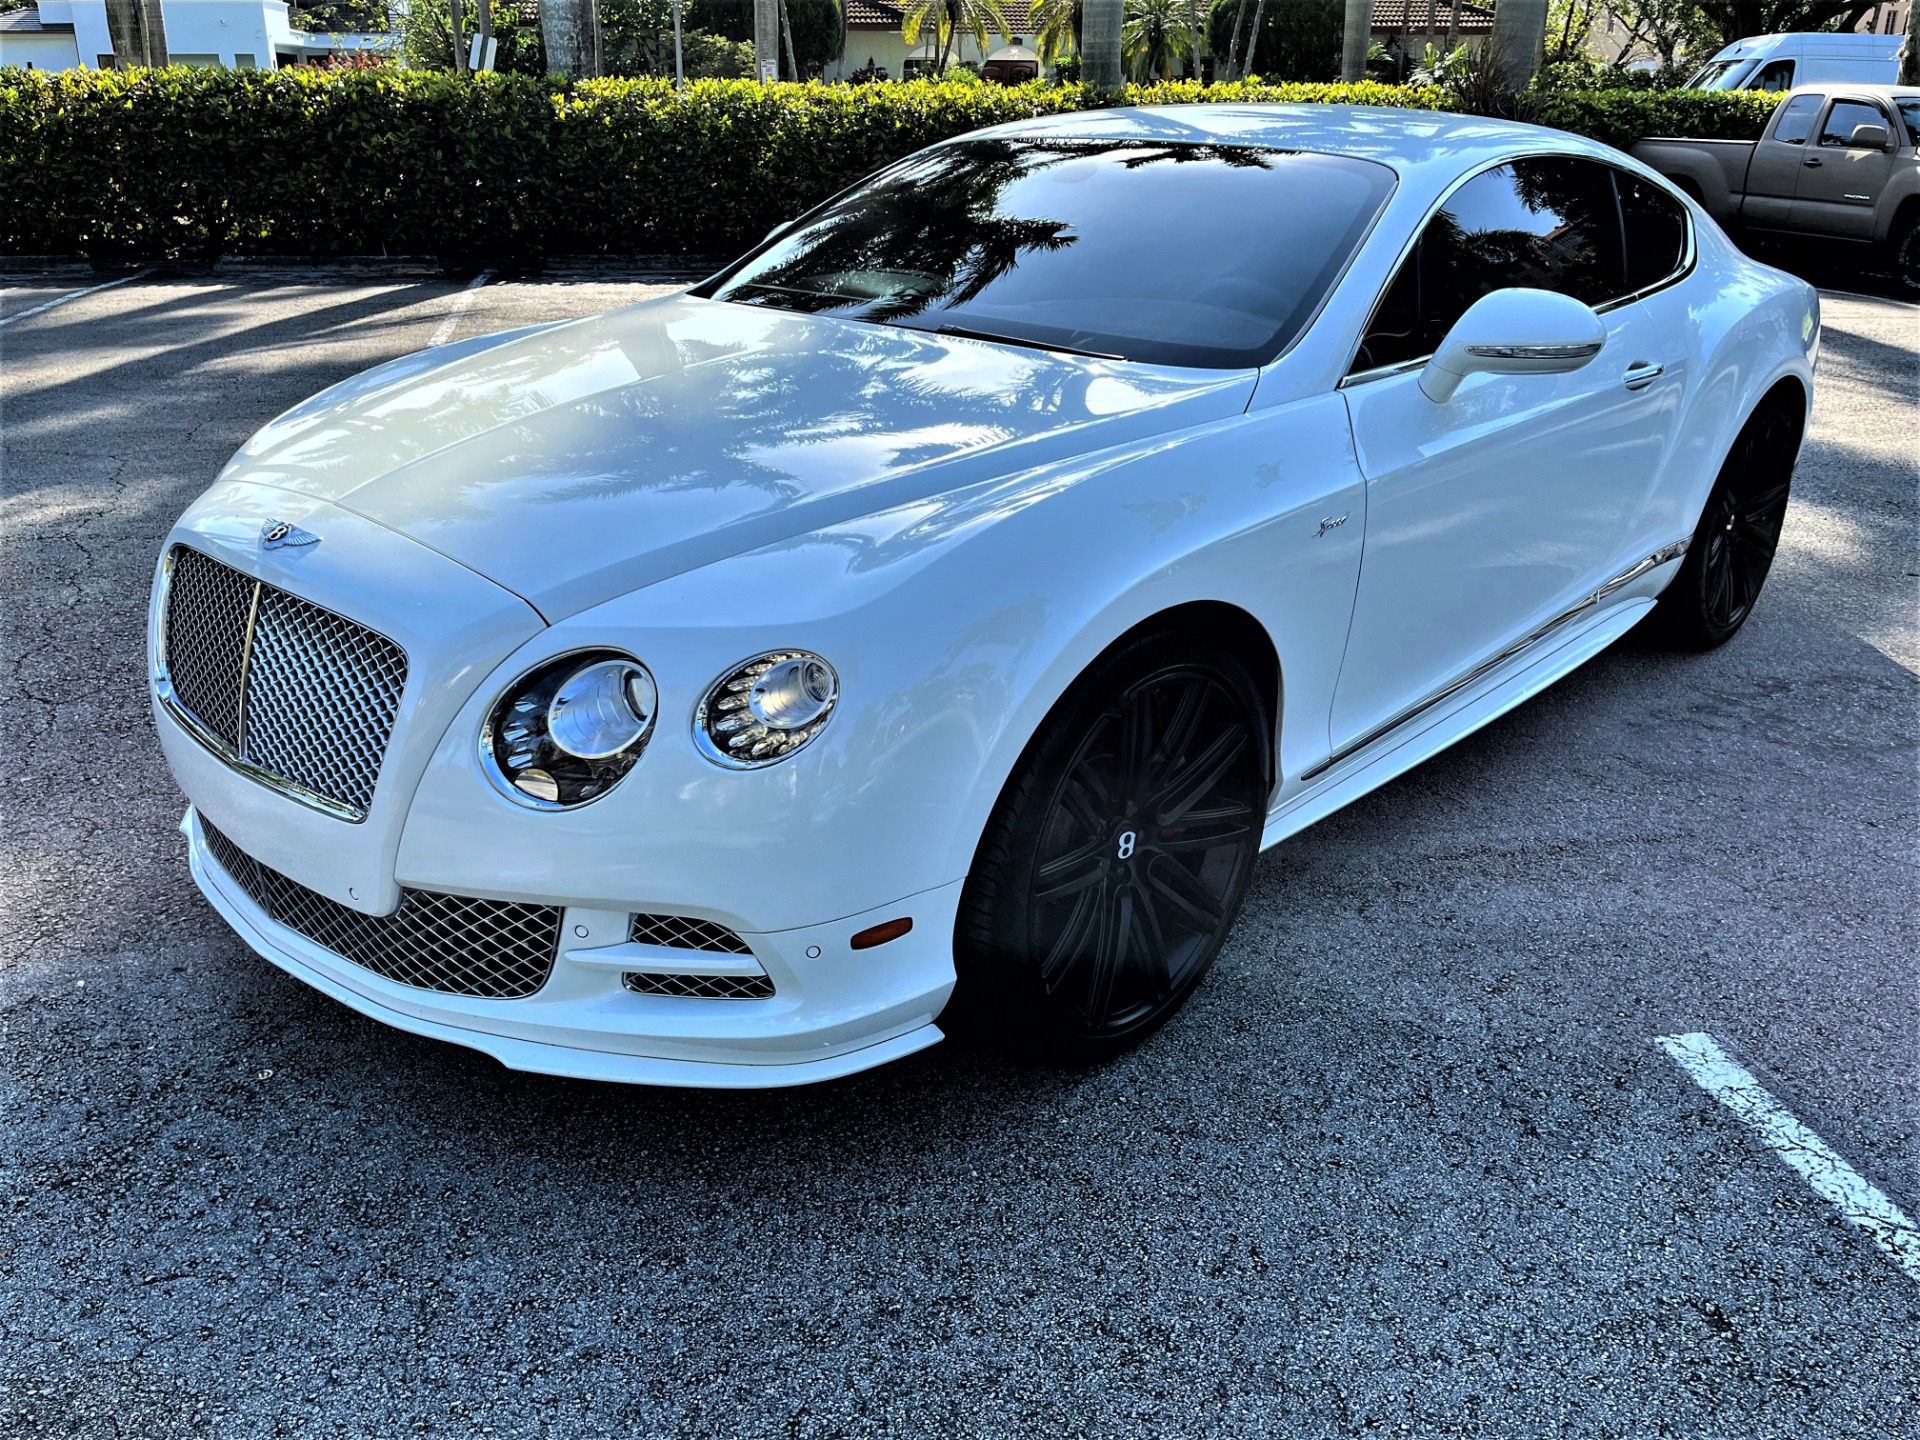 Used 2015 Bentley Continental GT Speed for sale $131,850 at The Gables Sports Cars in Miami FL 33146 4